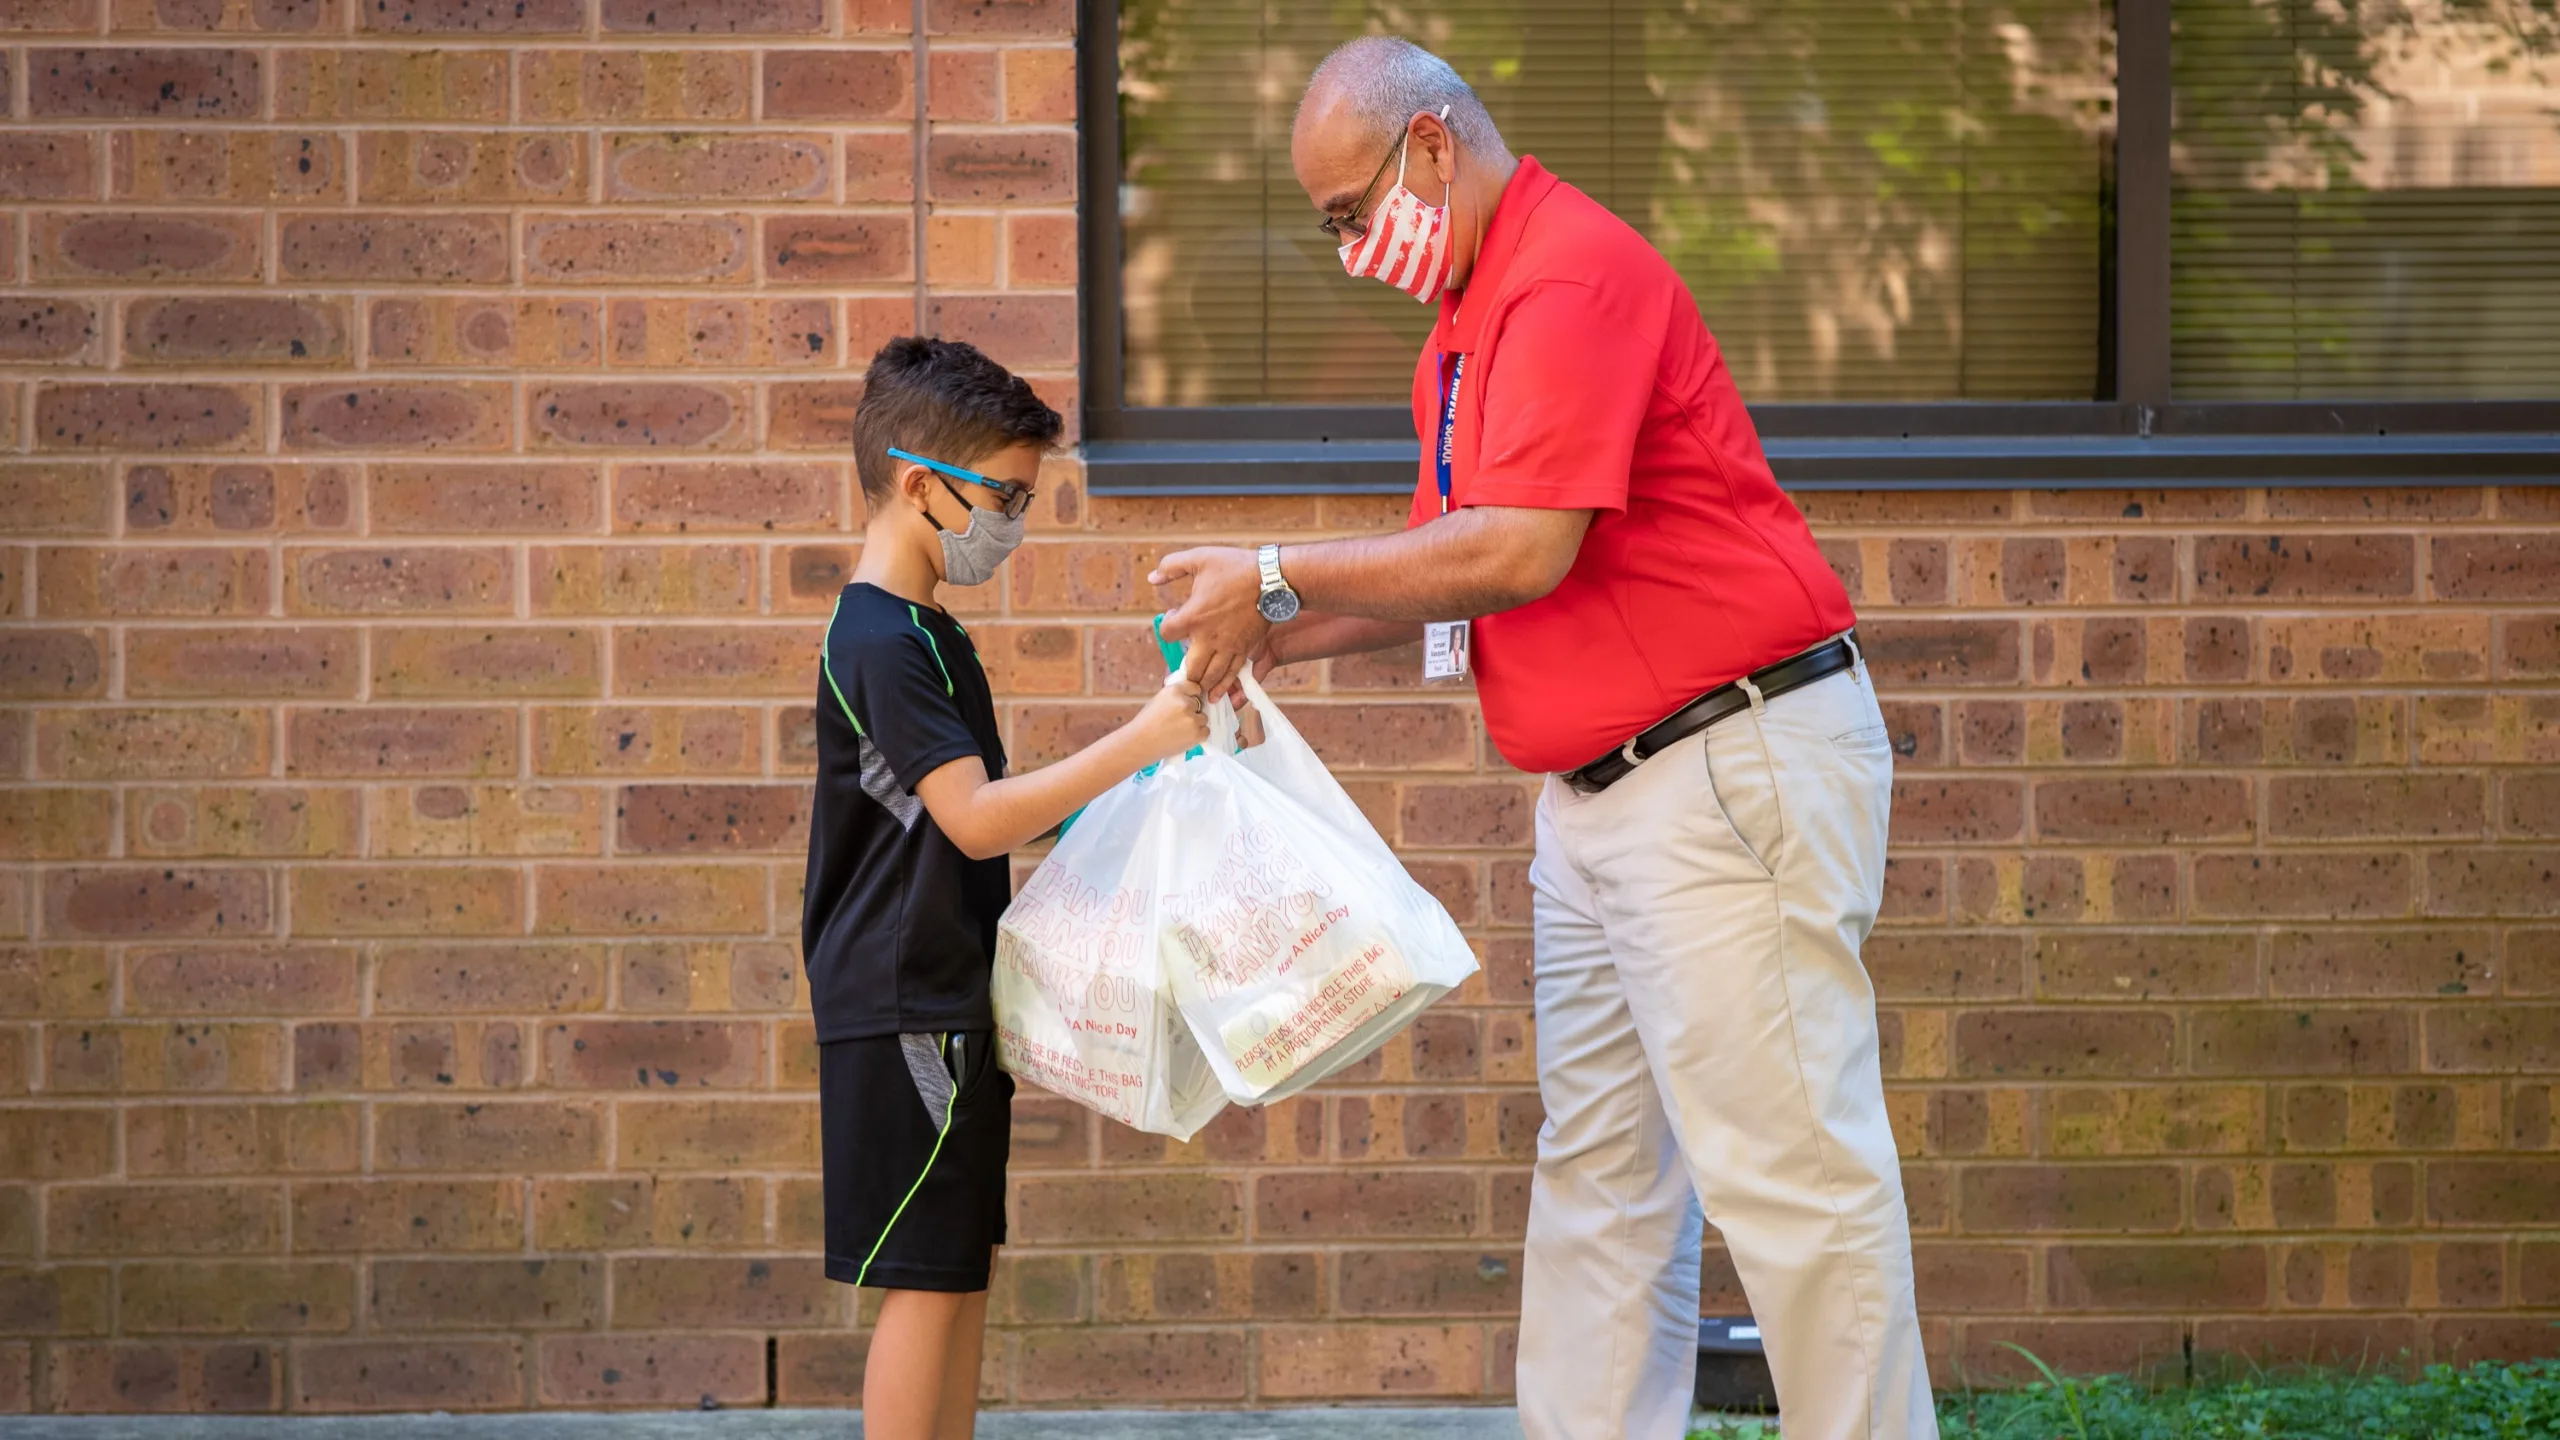 child receiving grocery bag from an adult